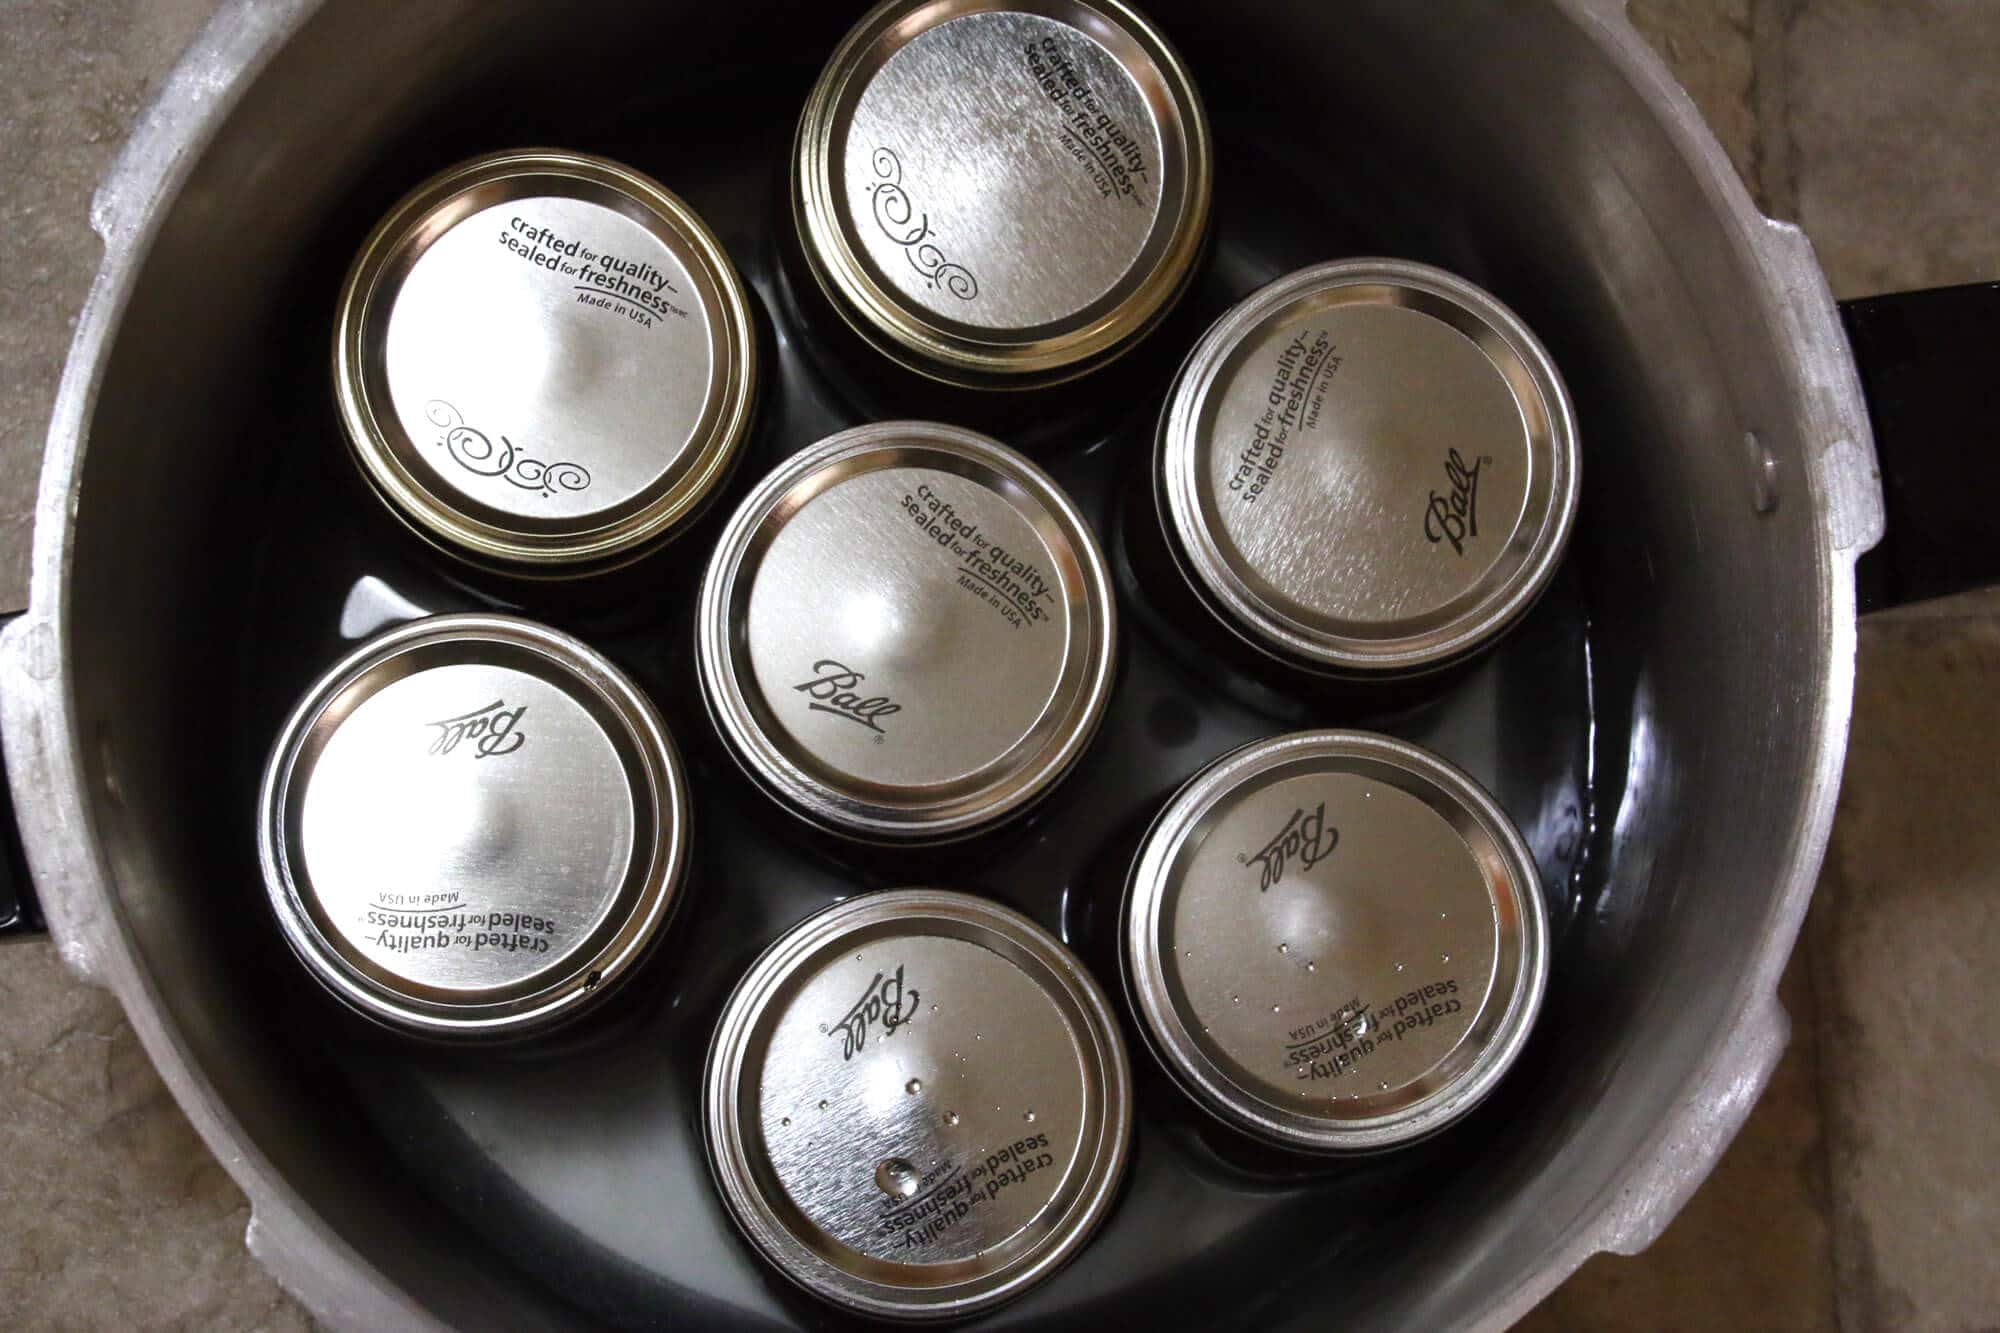 homemade canned boston baked beans pork and beans recipe pressure canner canning